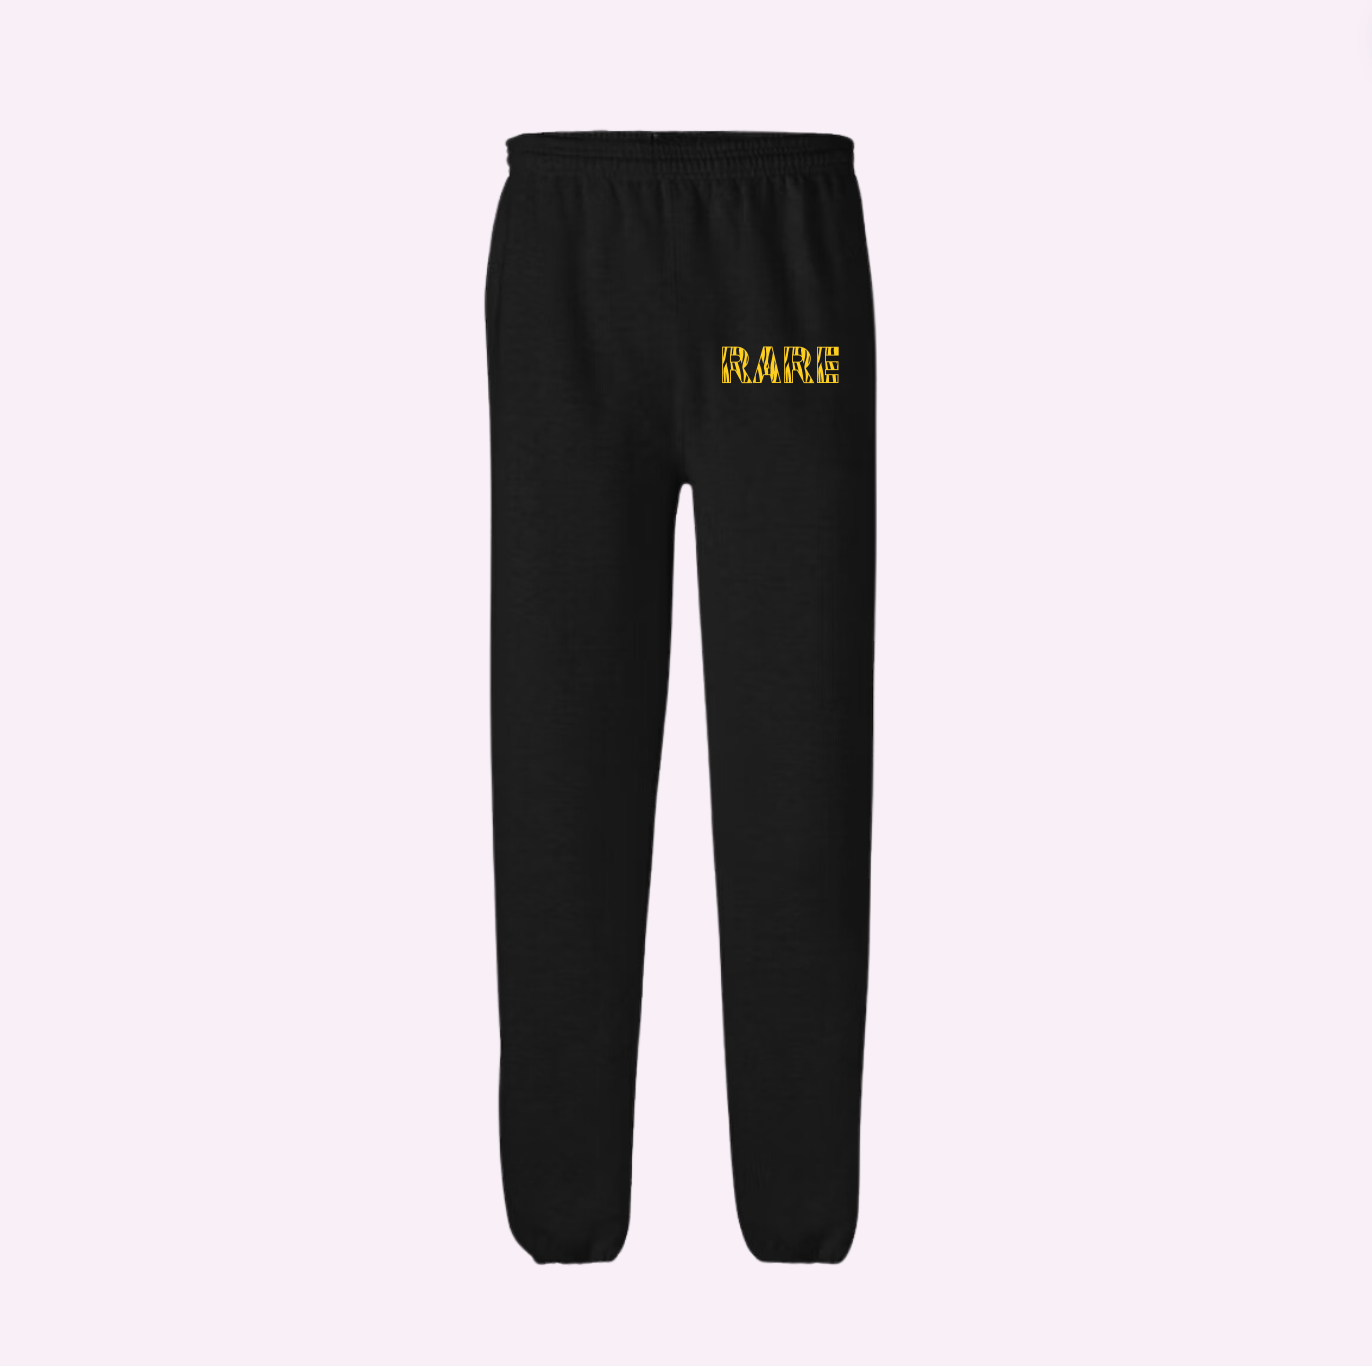 YELLOW FOR YIANNIS ♡ printed sweatpants